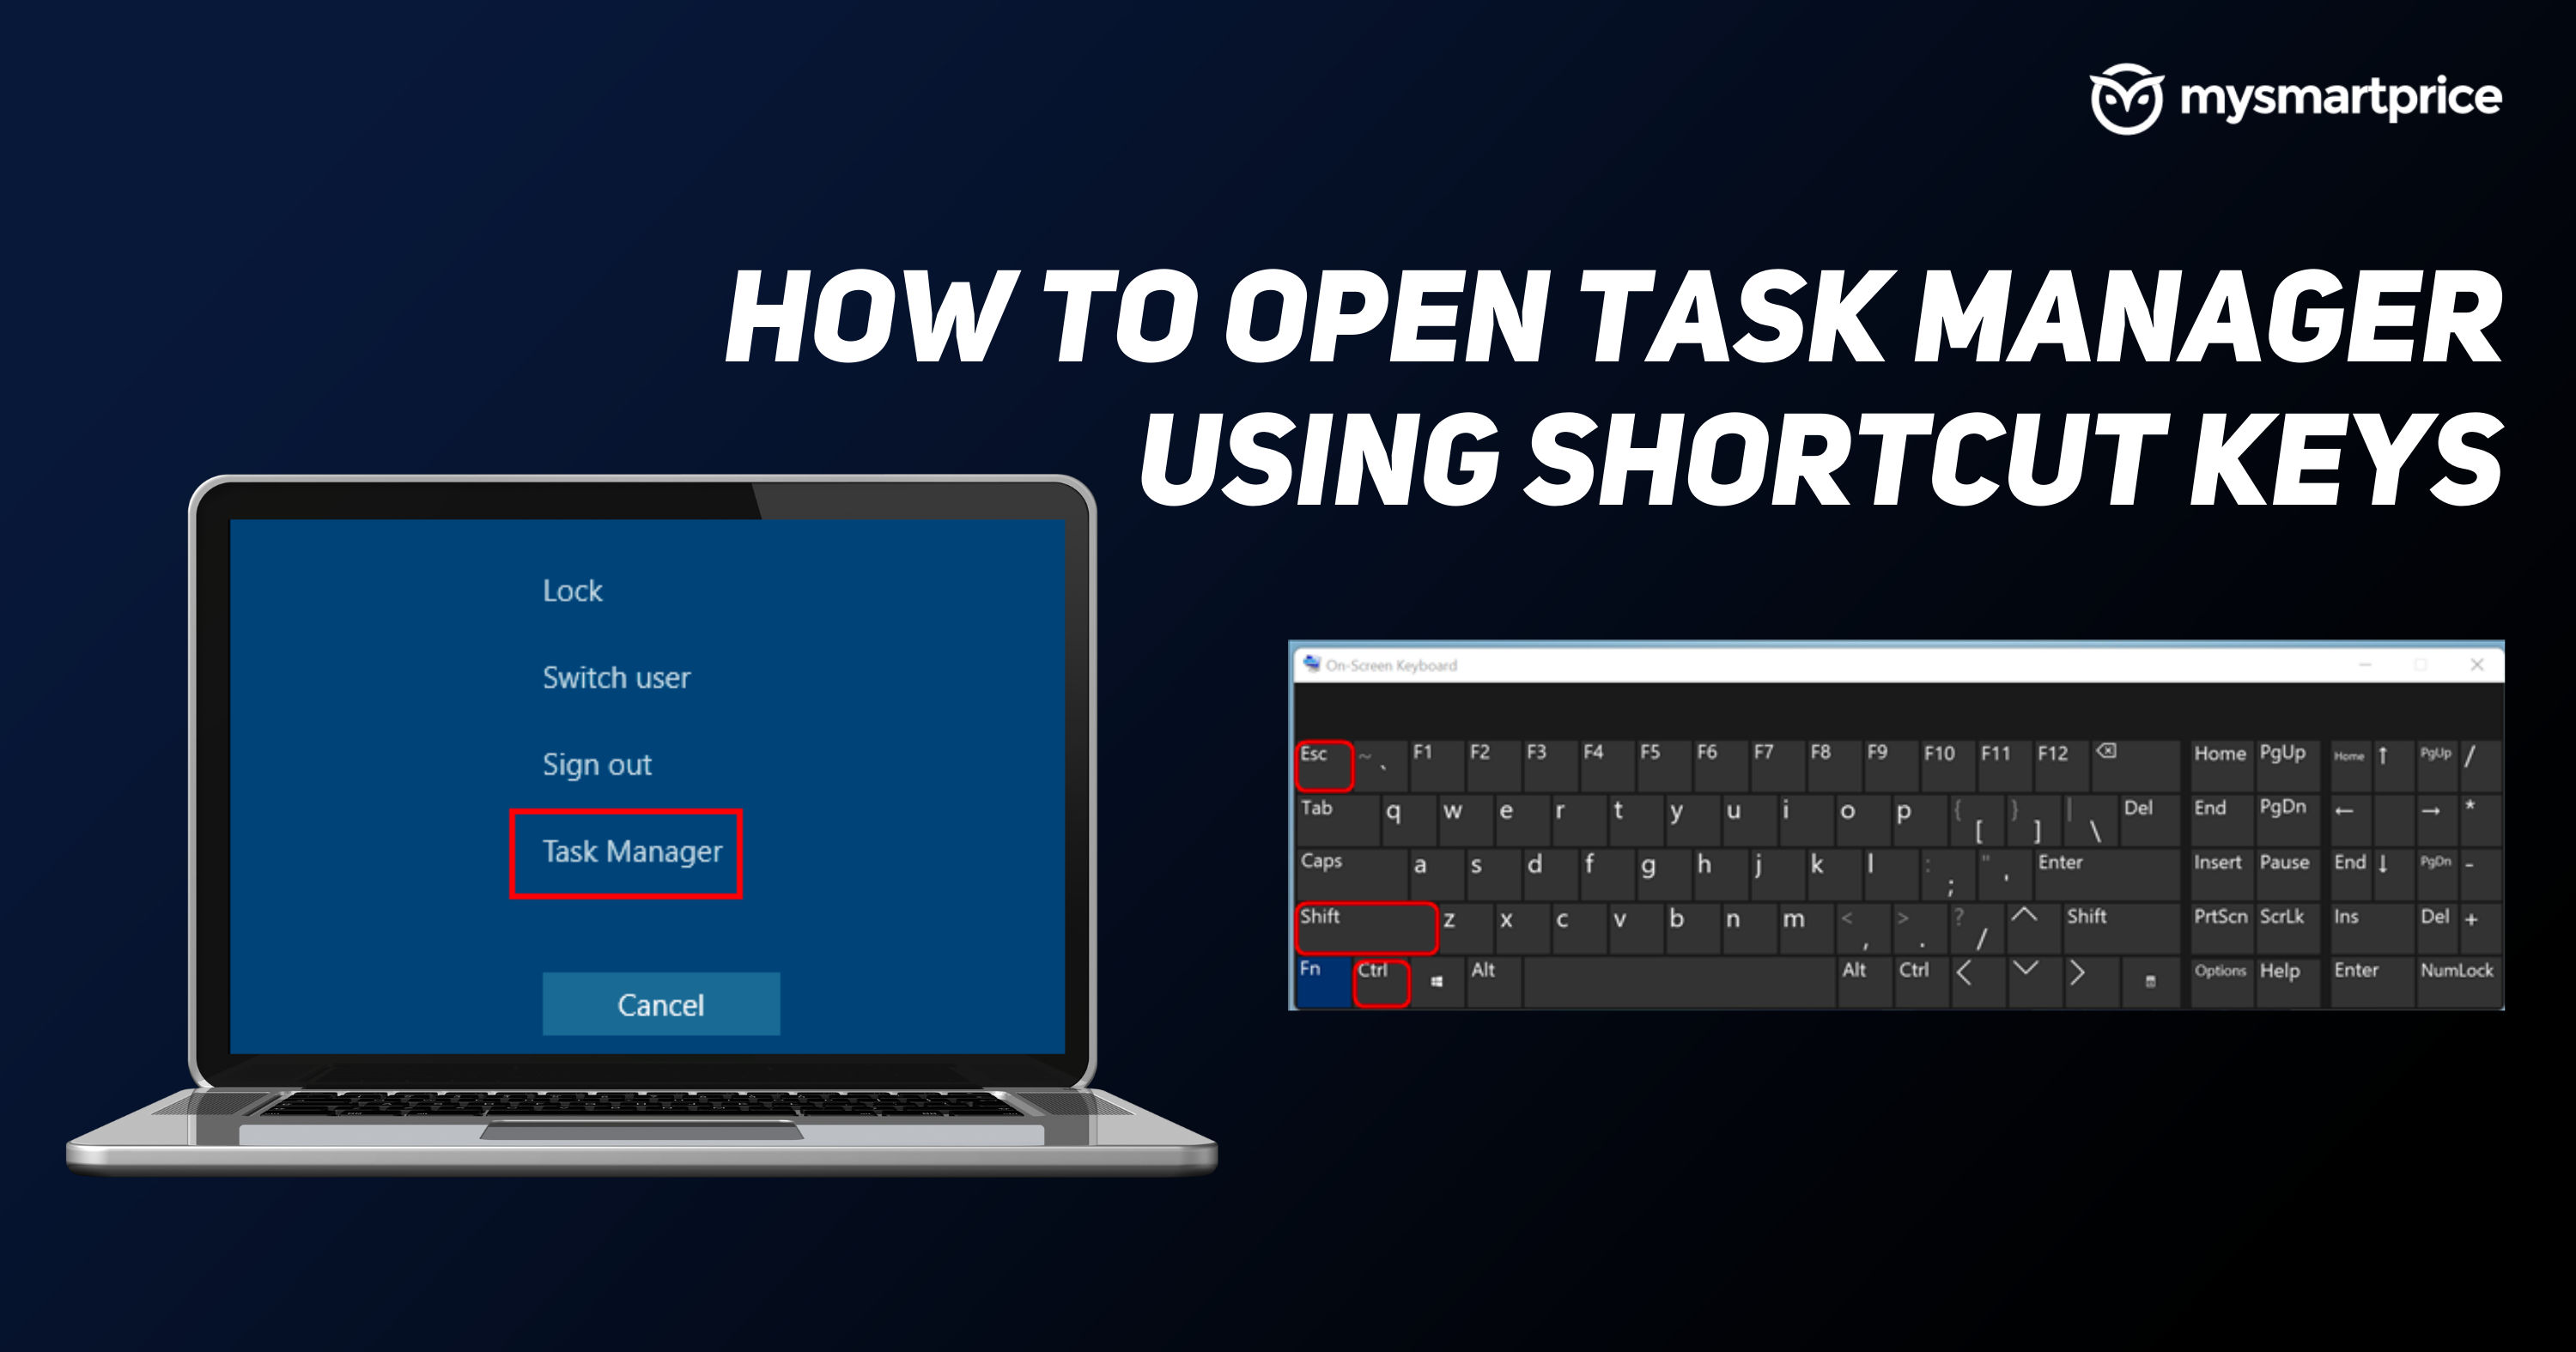 Open Task Manager by pressing Ctrl+Shift+Esc
Select the Startup tab